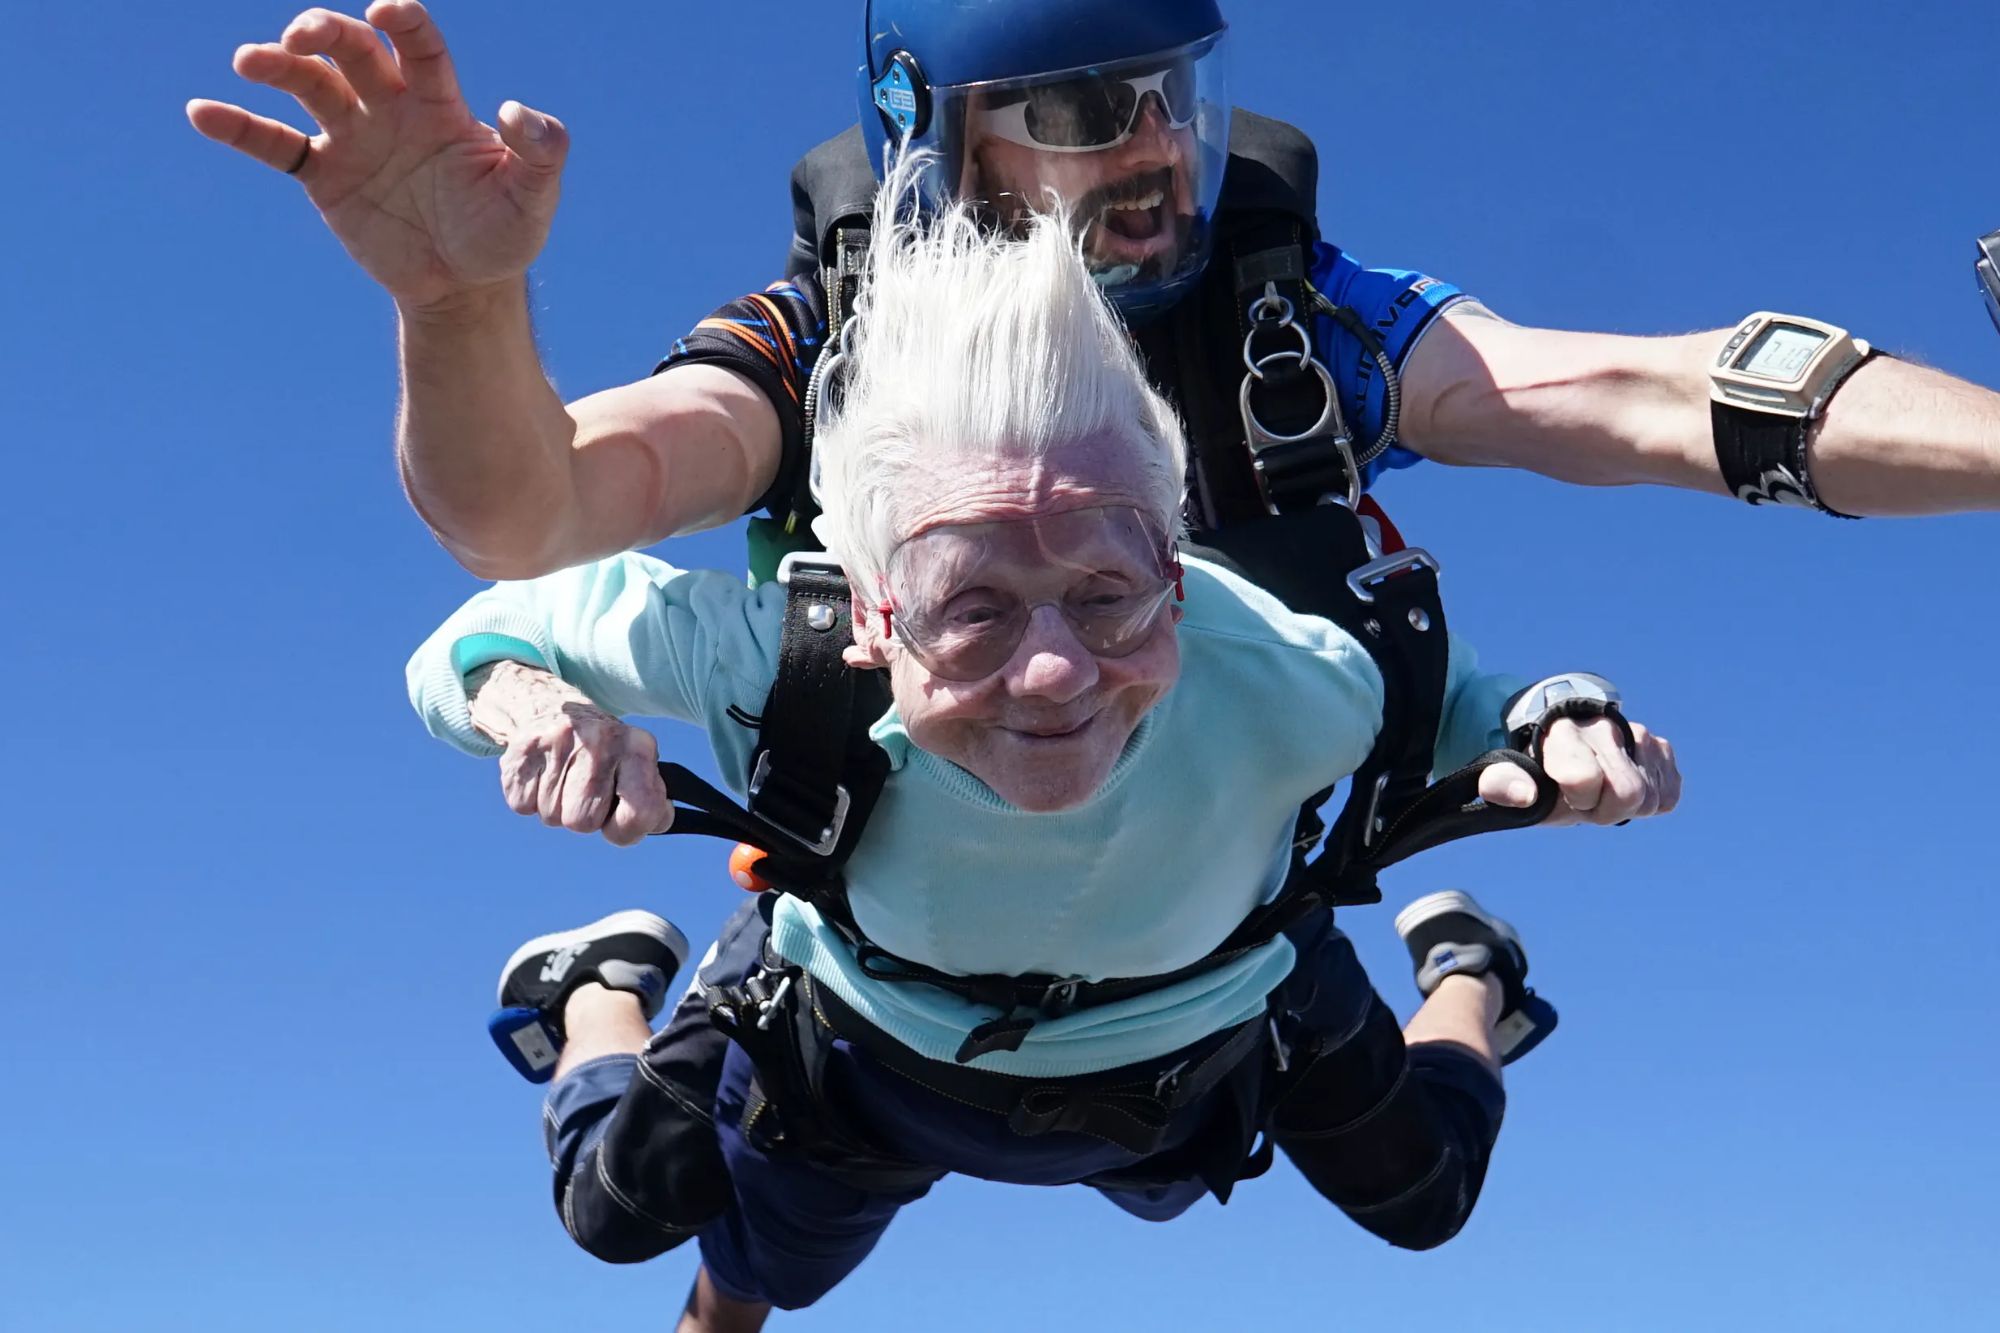 skydiving while having sex